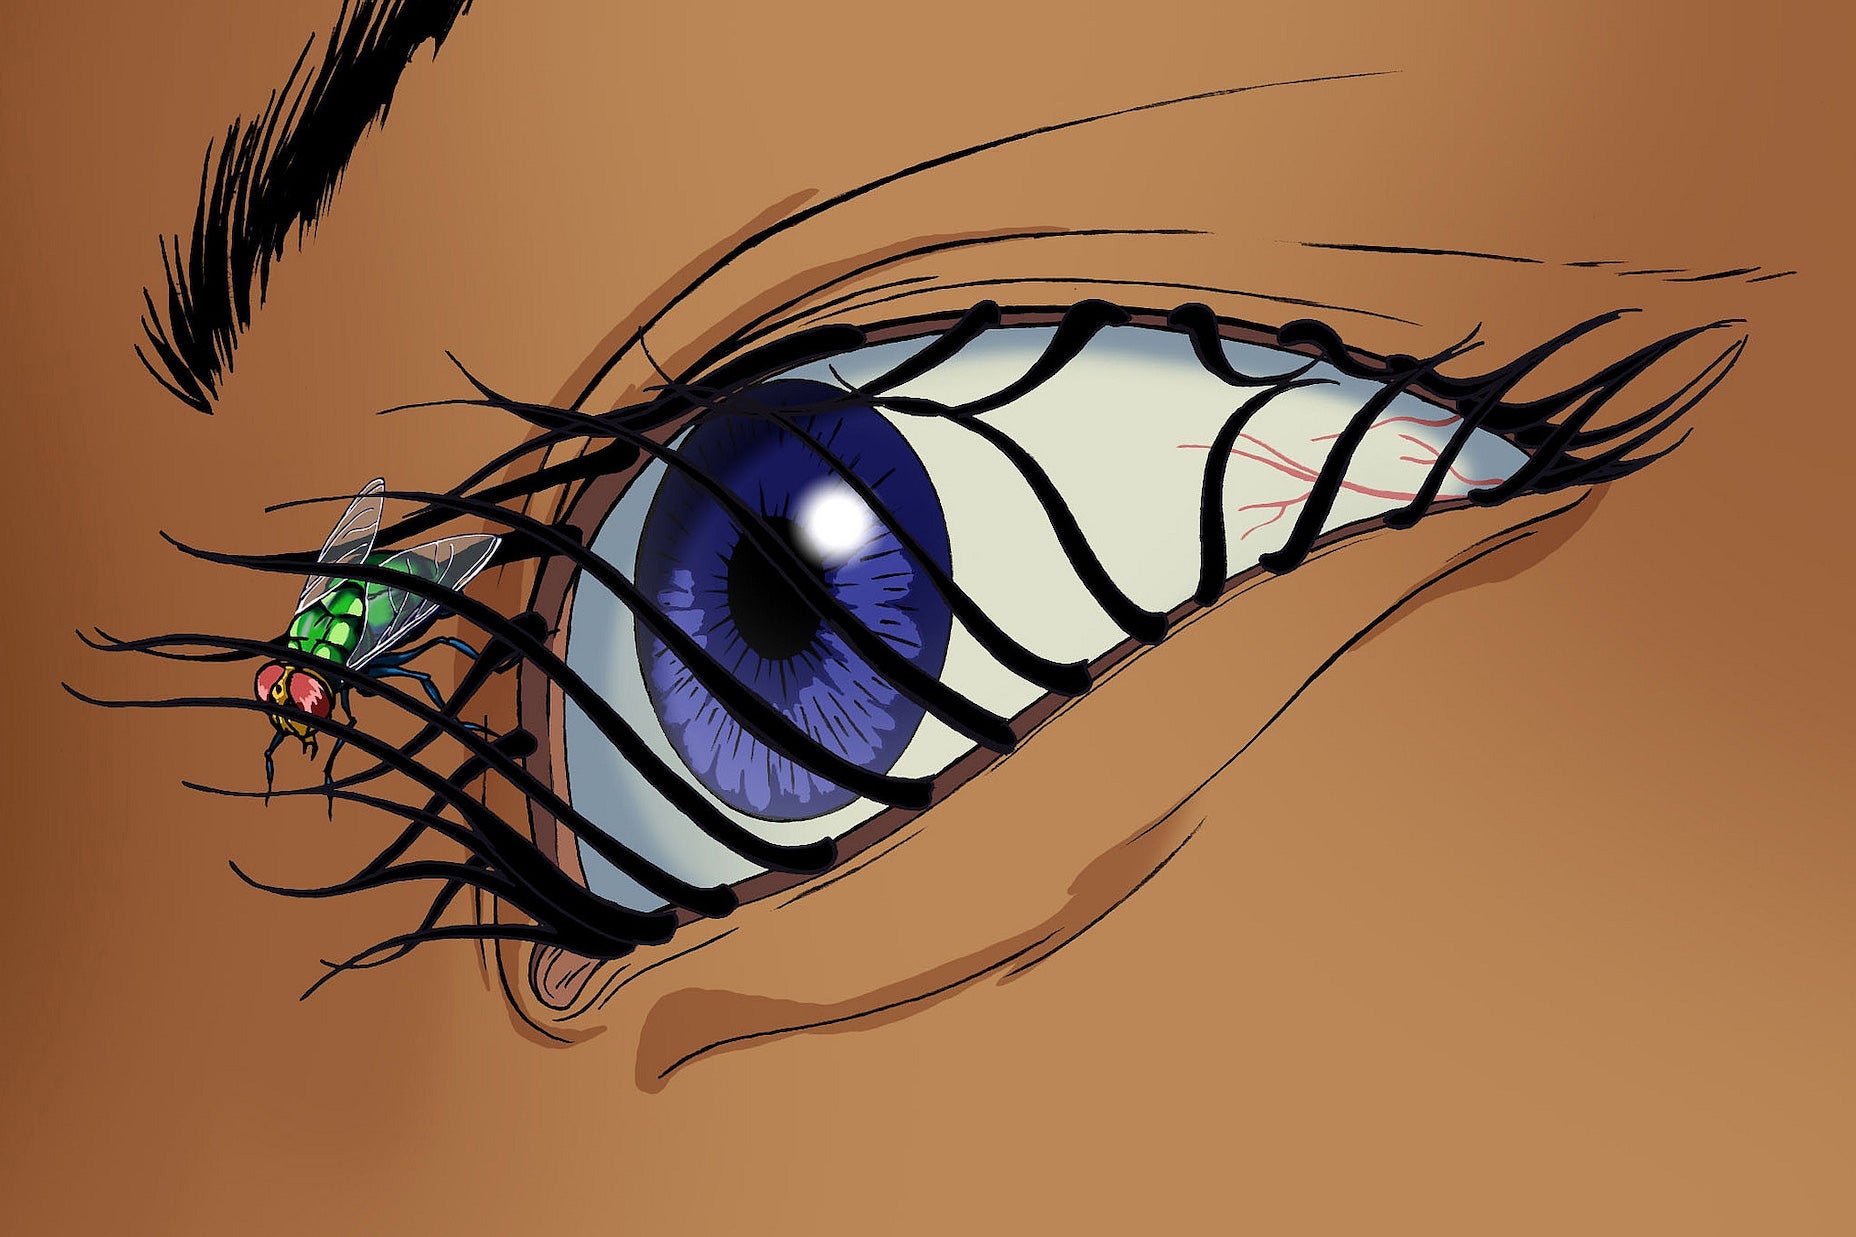 The logo for the Æon Flux series: an eye in extreme close-up, with a housefly struggling to extricate itself from the lashes.